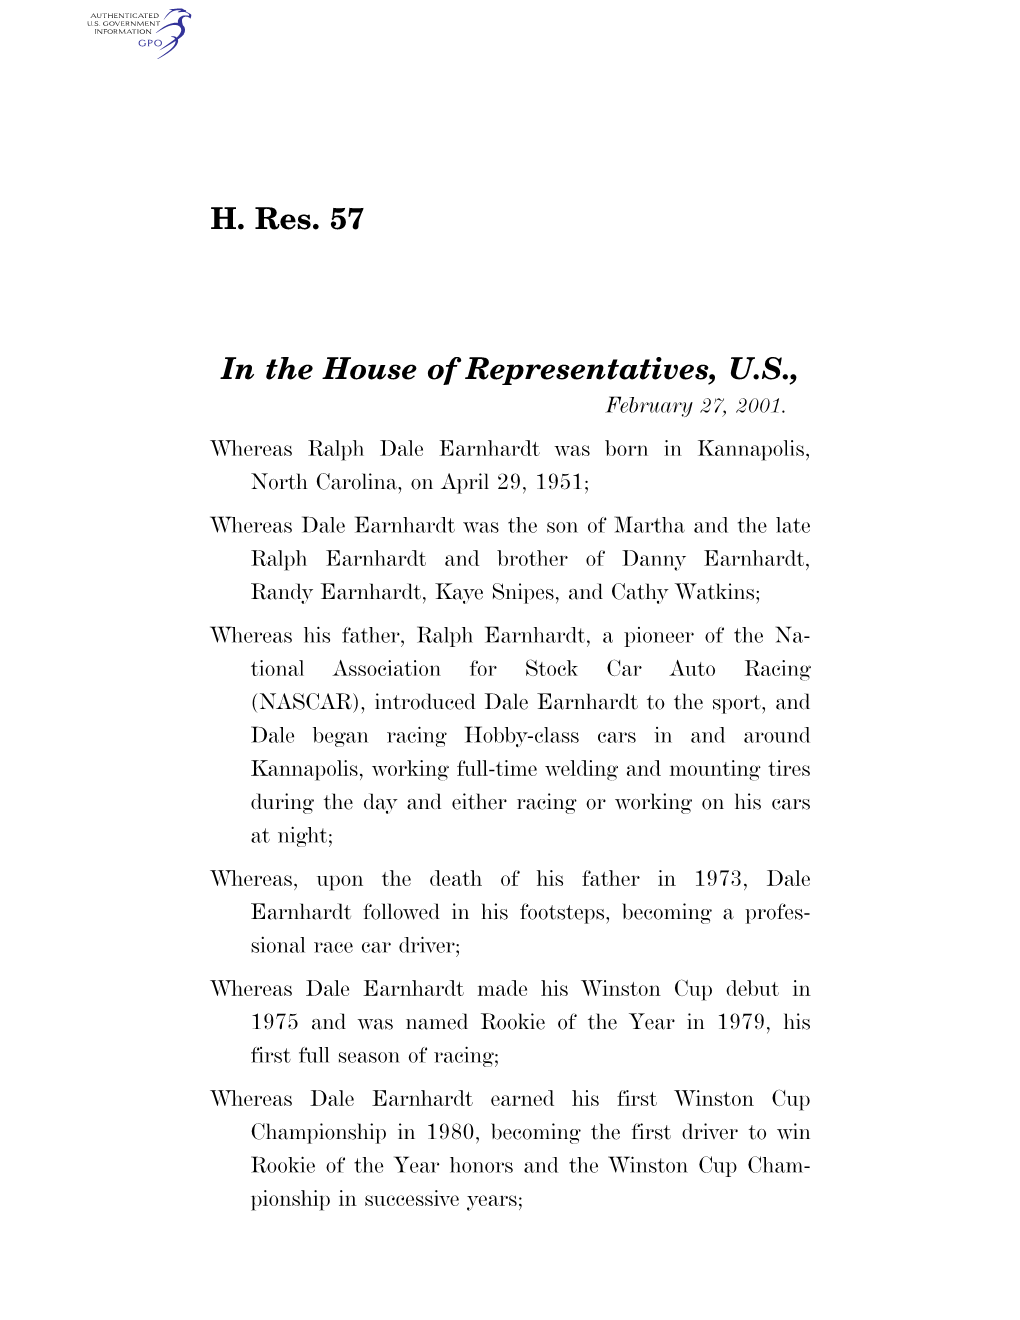 H. Res. 57 in the House of Representatives, U.S